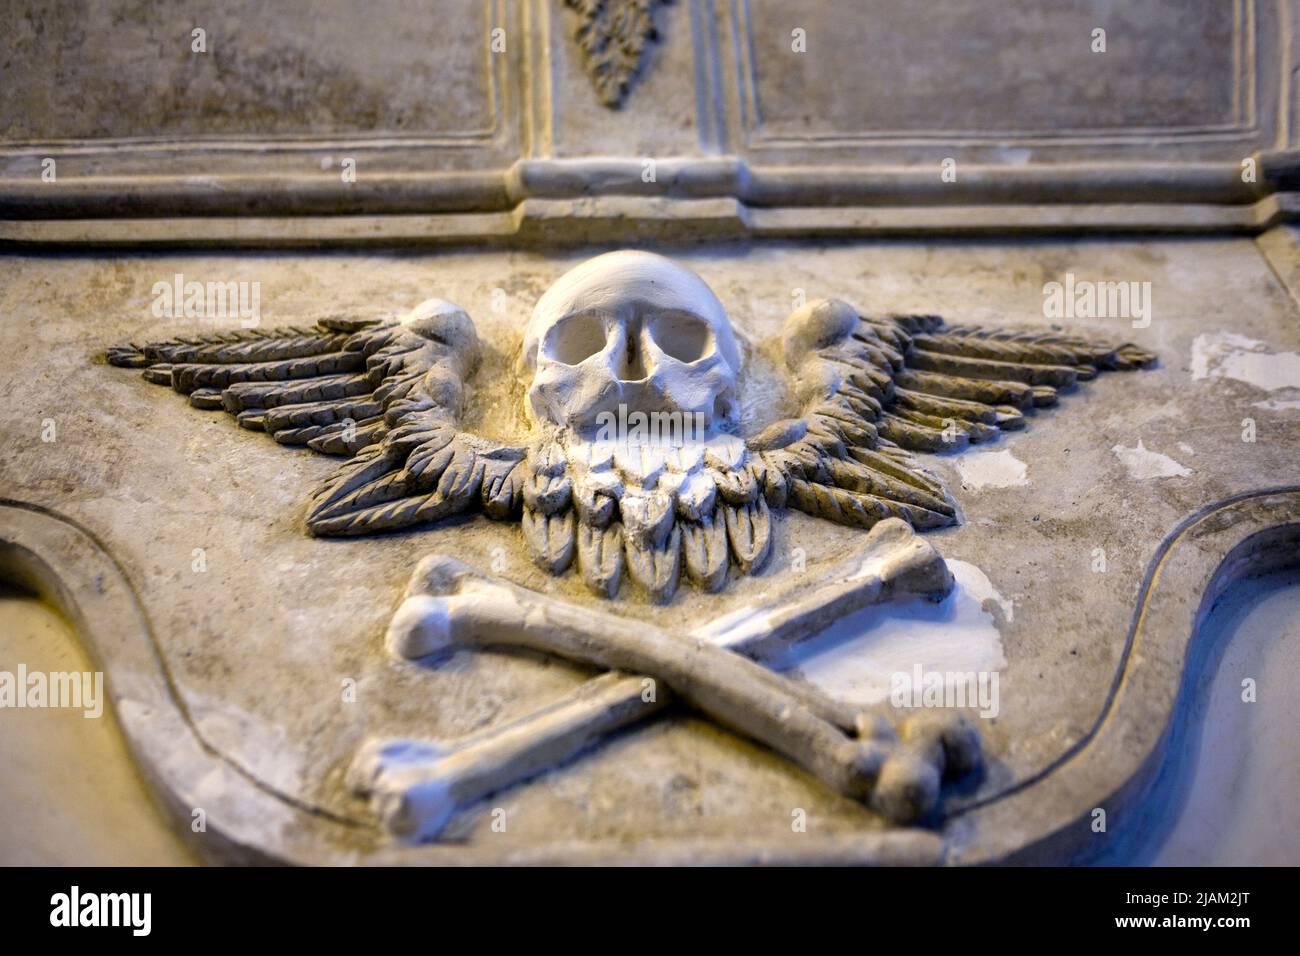 Skull and crossbones moulding, St. Audeon's Church, Dublin. Nothing to do with pirates - the symbol, and the hourglass above it refer to death, decay, Stock Photo